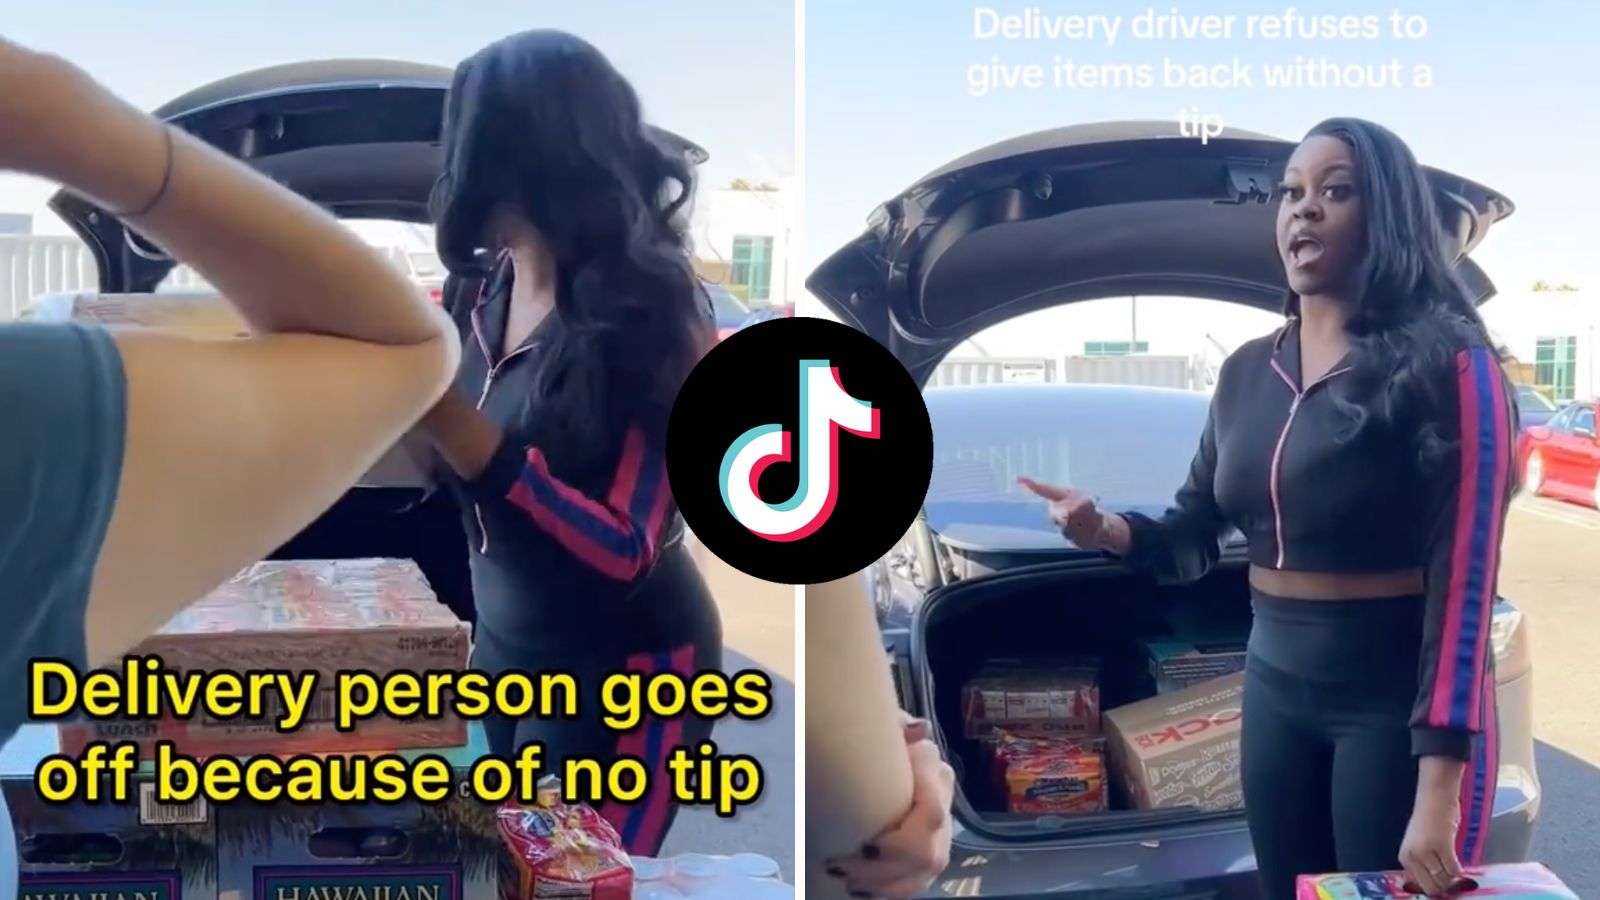 Delivery driver returns groceries after customer doesn’t tip on $400 order